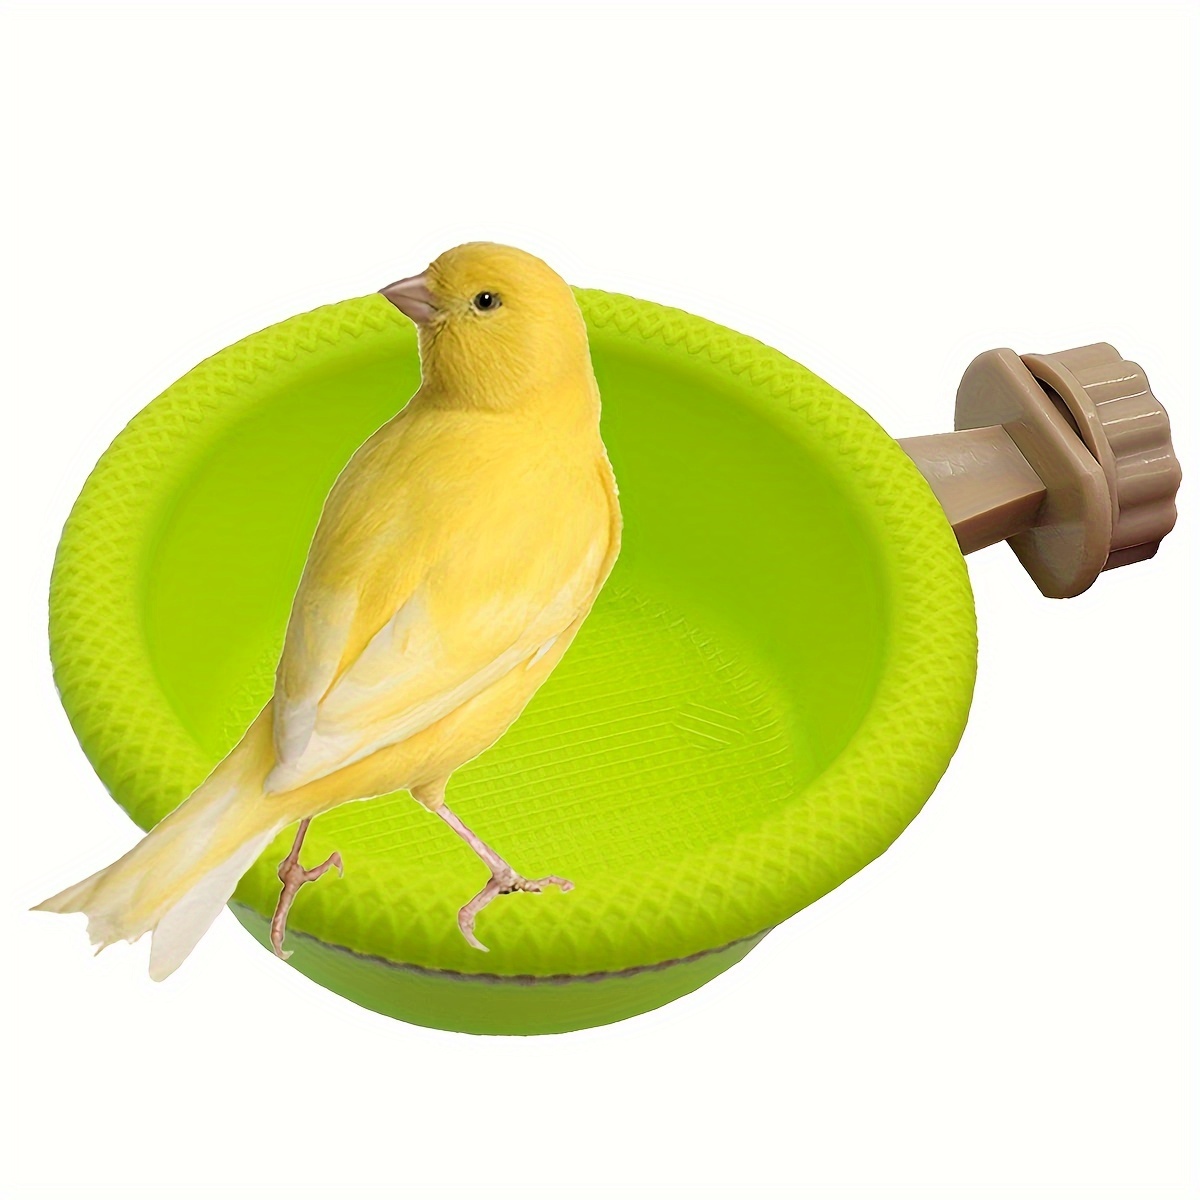 

Bird Cage Bath Tub With Perch Stand For Canary Finch Budgerigar - Tpu Thermoplastic Parrot Supplies Bathing Accessory - Easy Rotating Fixation (4.5")